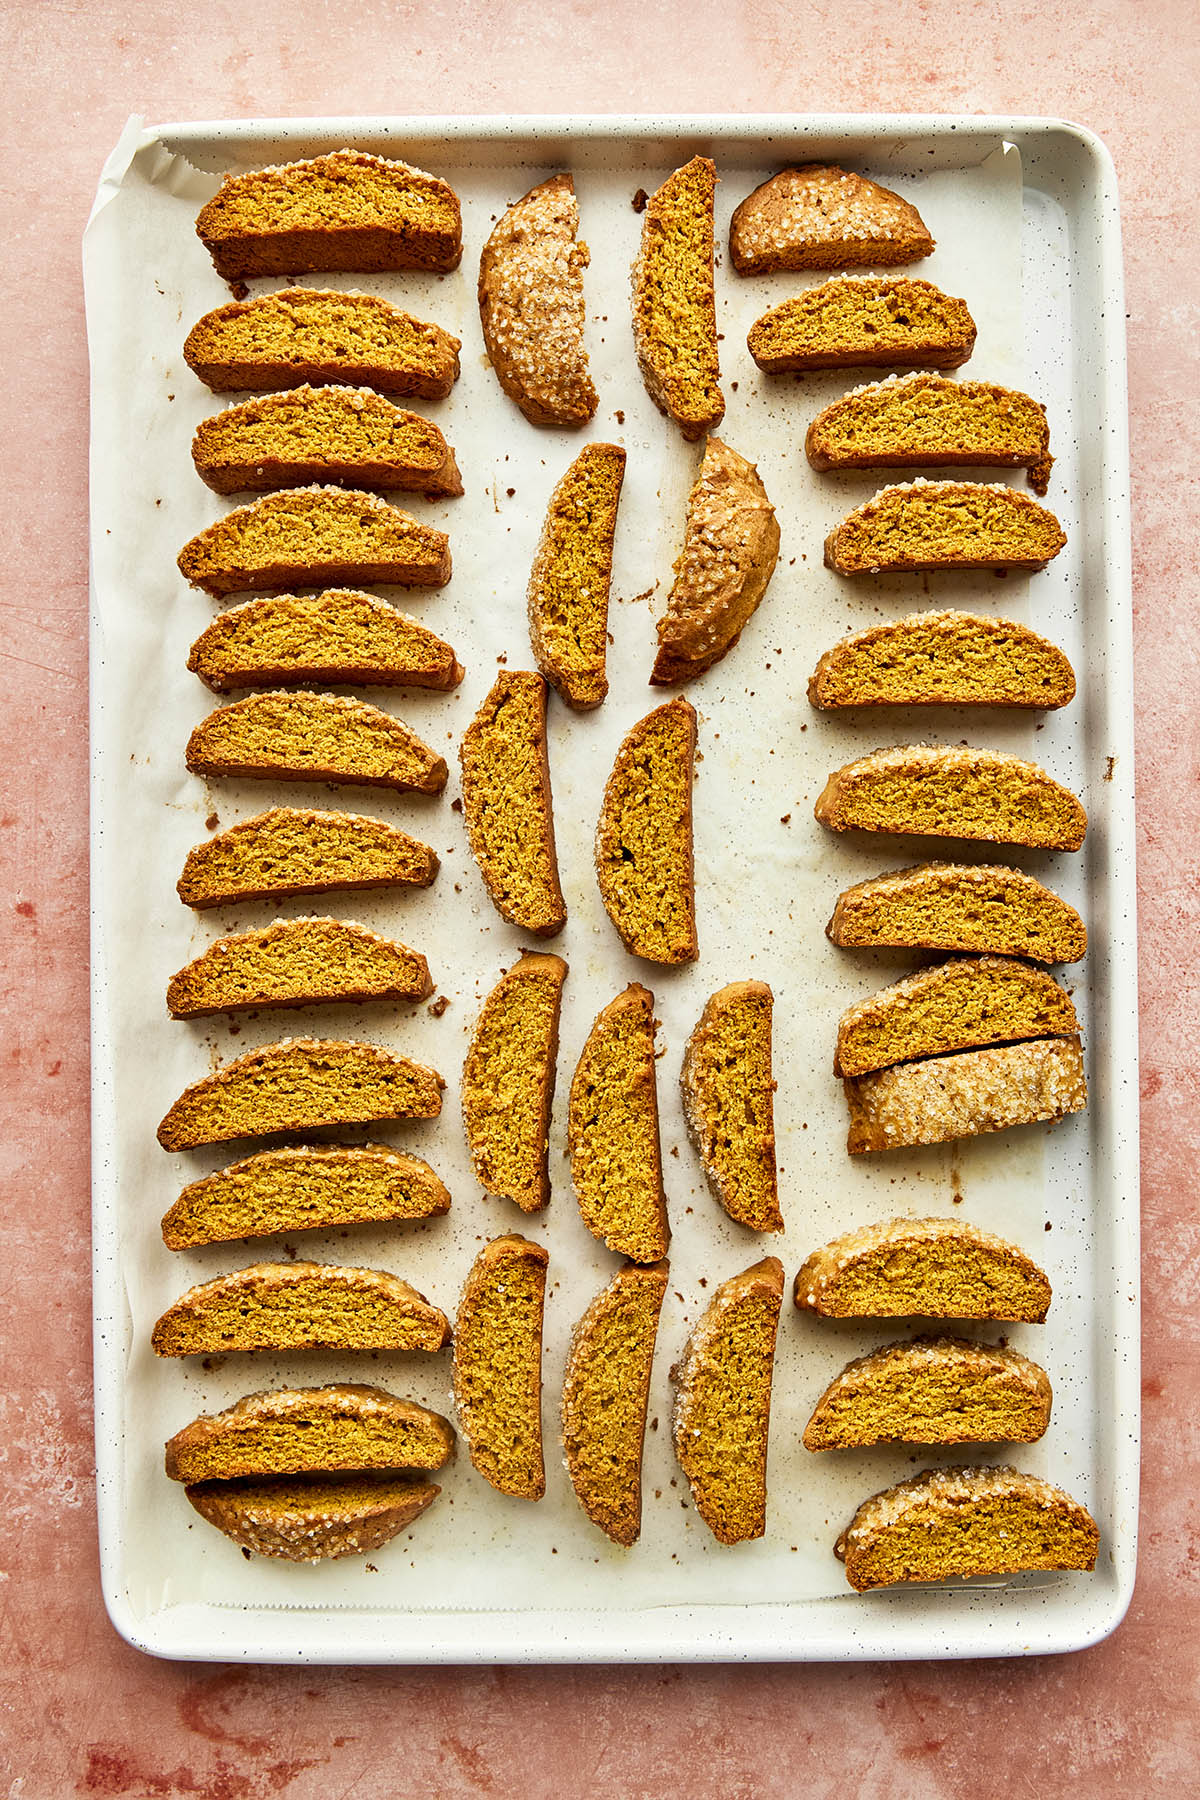 Pumpkin biscotti fully baked on a baking tray.